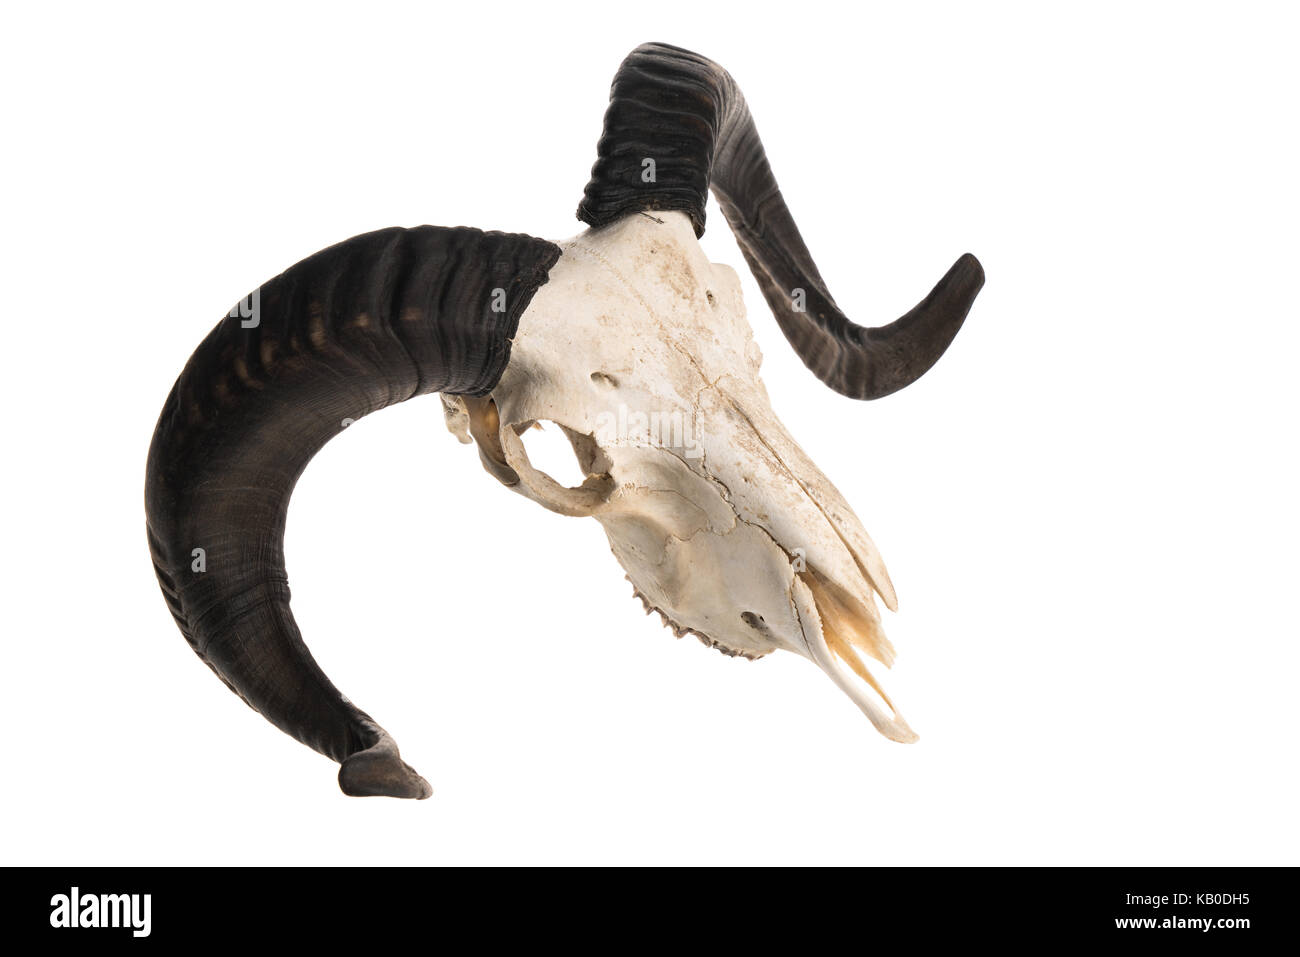 Top view of a ram skull with horns, studio shot isolated on white background Stock Photo